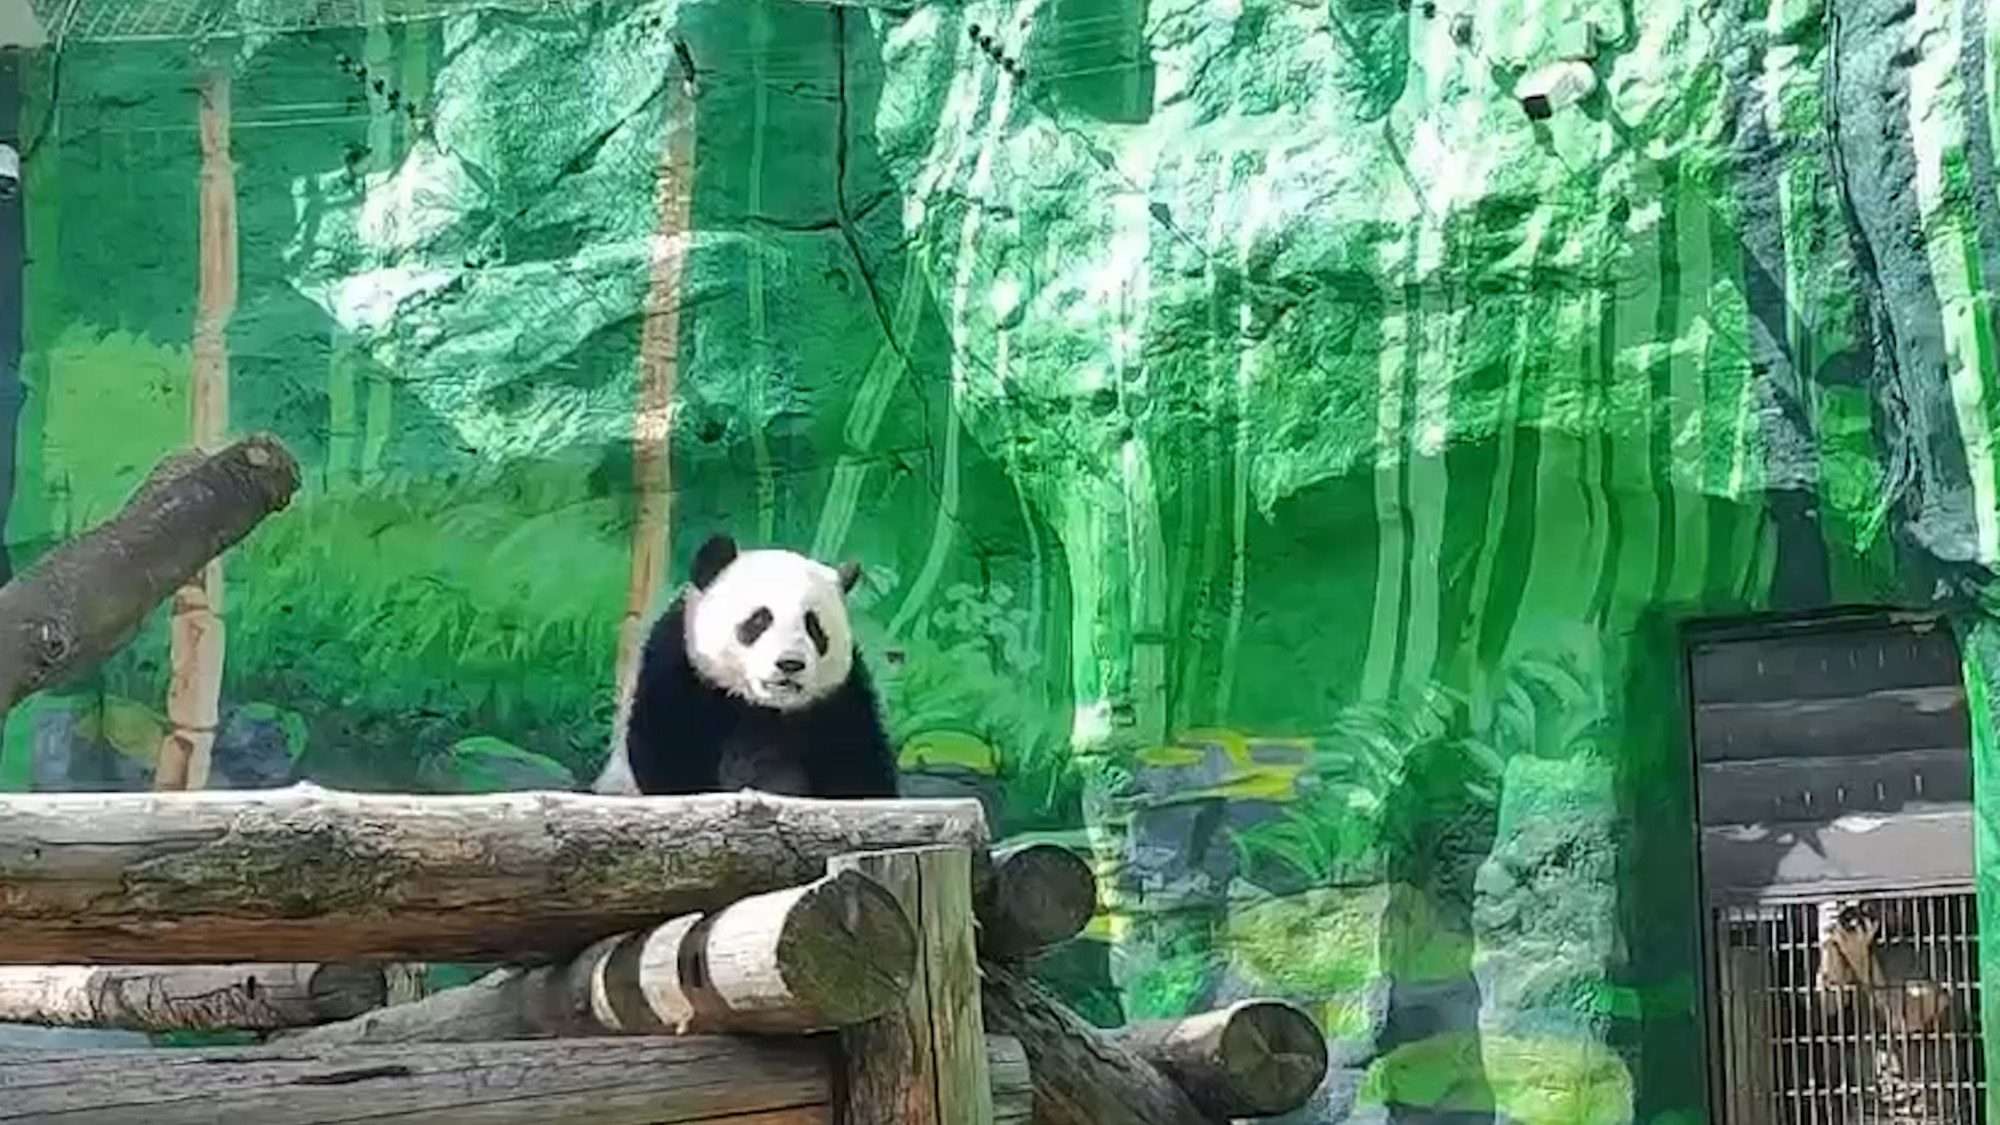 Read more about the article Adorable Giant Panda Cub Explores Her Enclosure